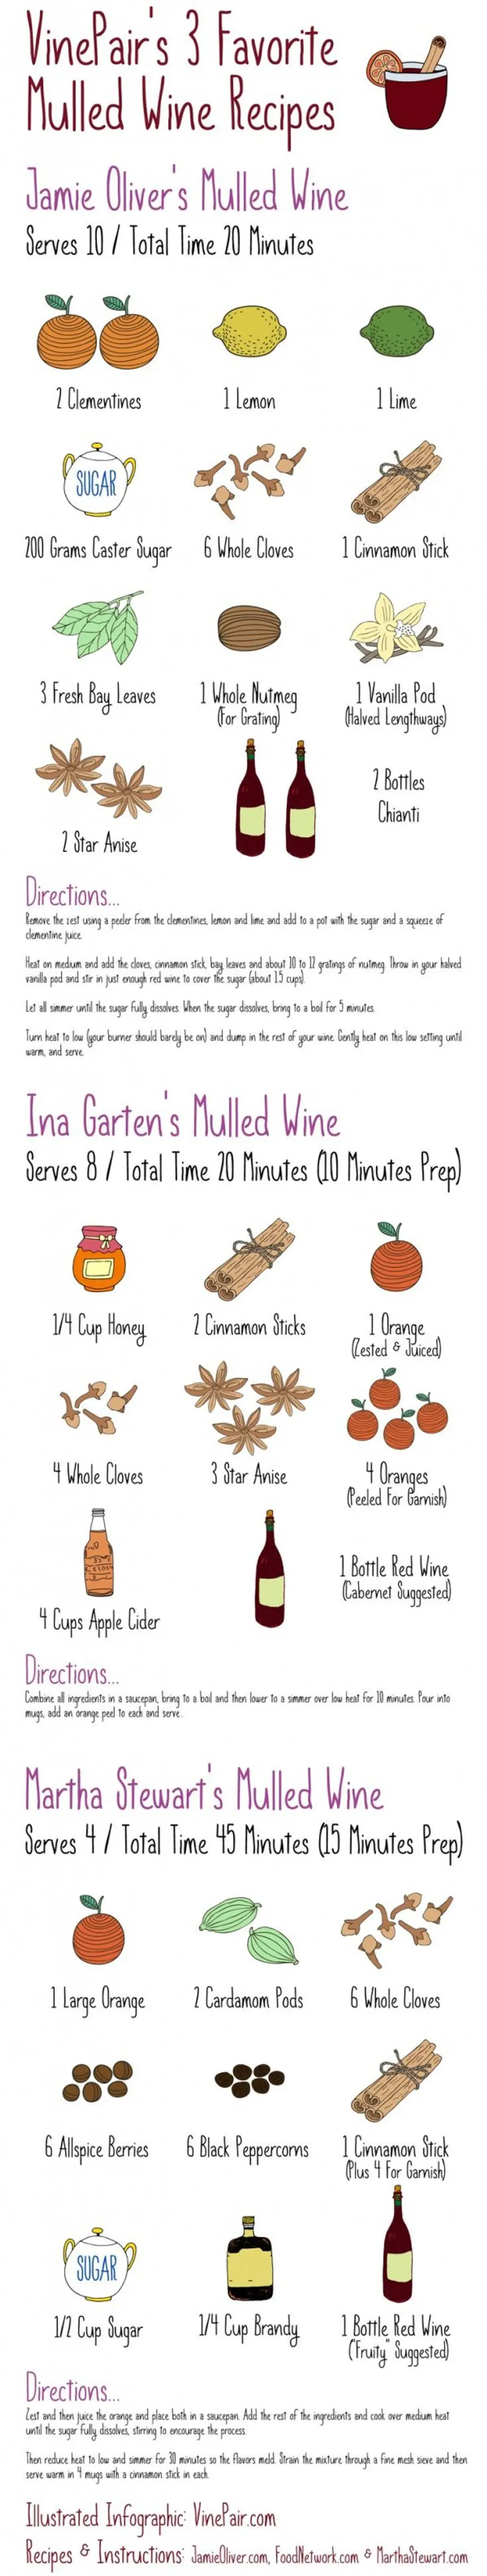 Mulled Wine Recipes (yum!)